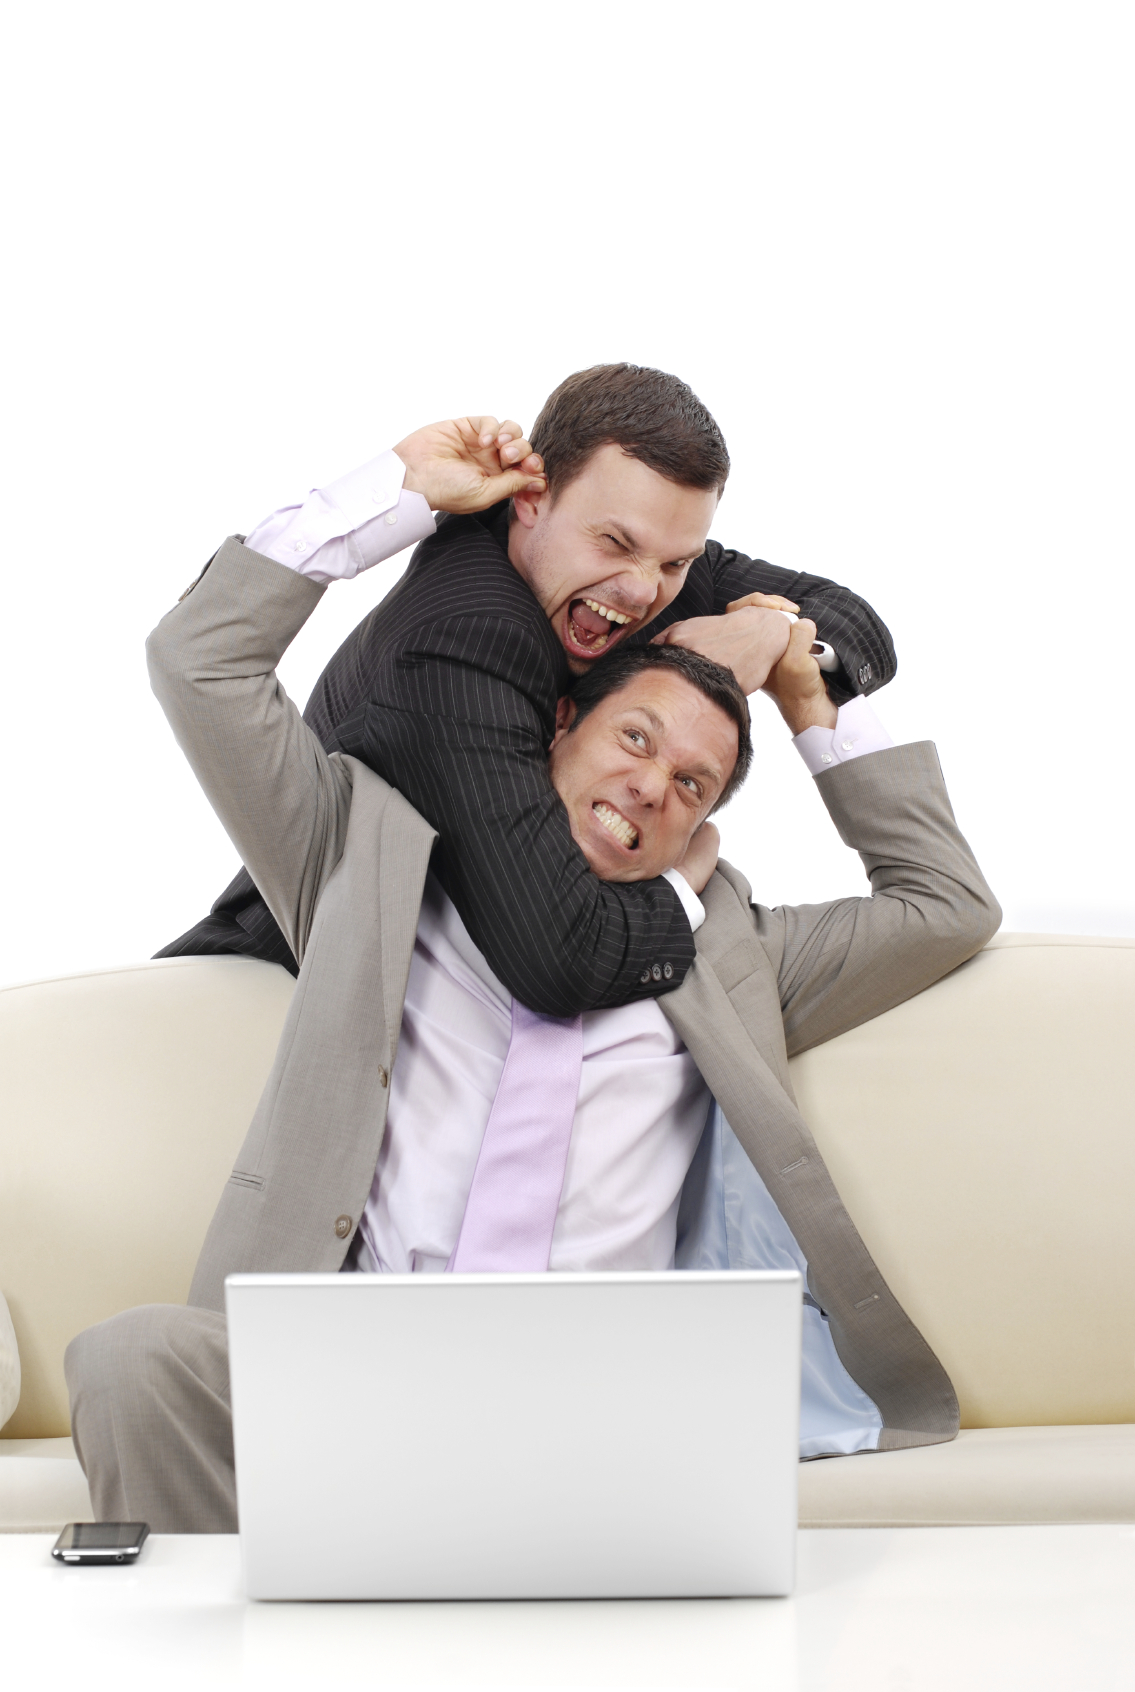 Two businessmen fighting on a couch in front of a laptop